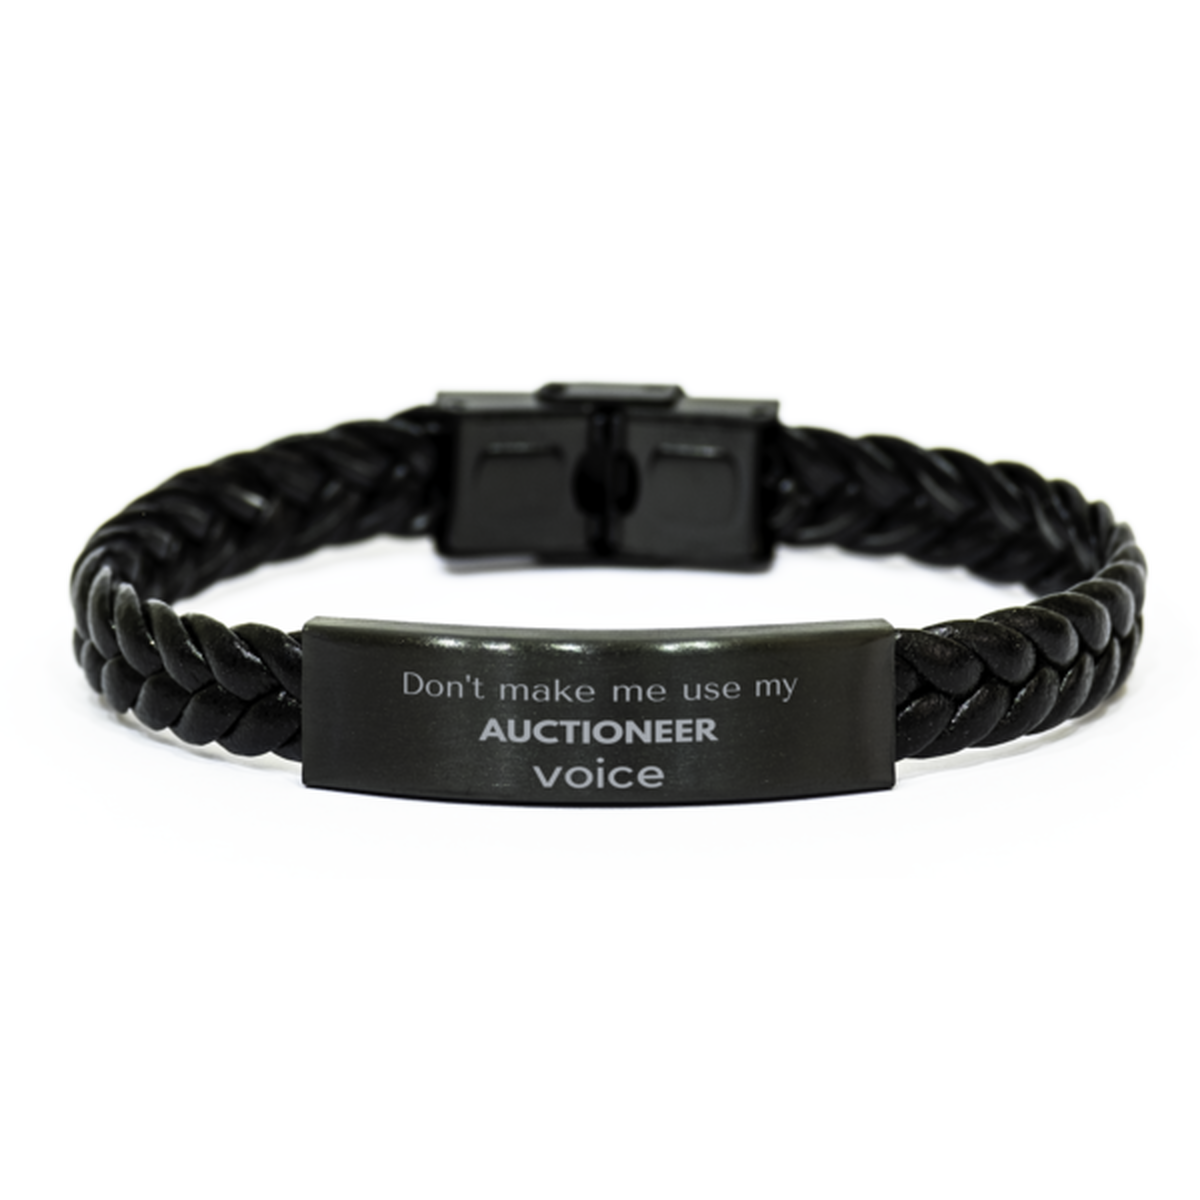 Don't make me use my Auctioneer voice, Sarcasm Auctioneer Gifts, Christmas Auctioneer Braided Leather Bracelet Birthday Unique Gifts For Auctioneer Coworkers, Men, Women, Colleague, Friends